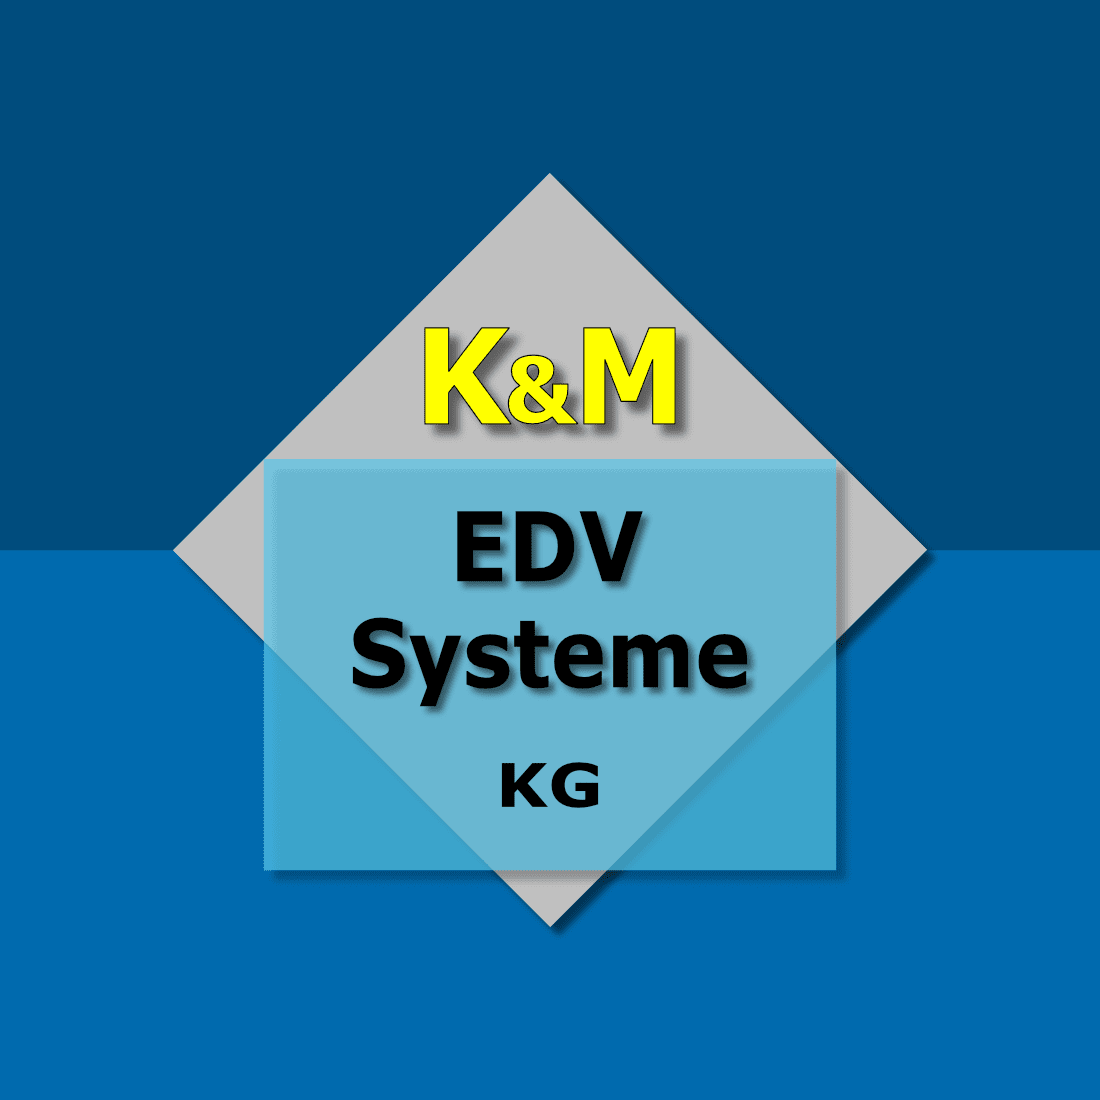 (c) Edv-systeme.at